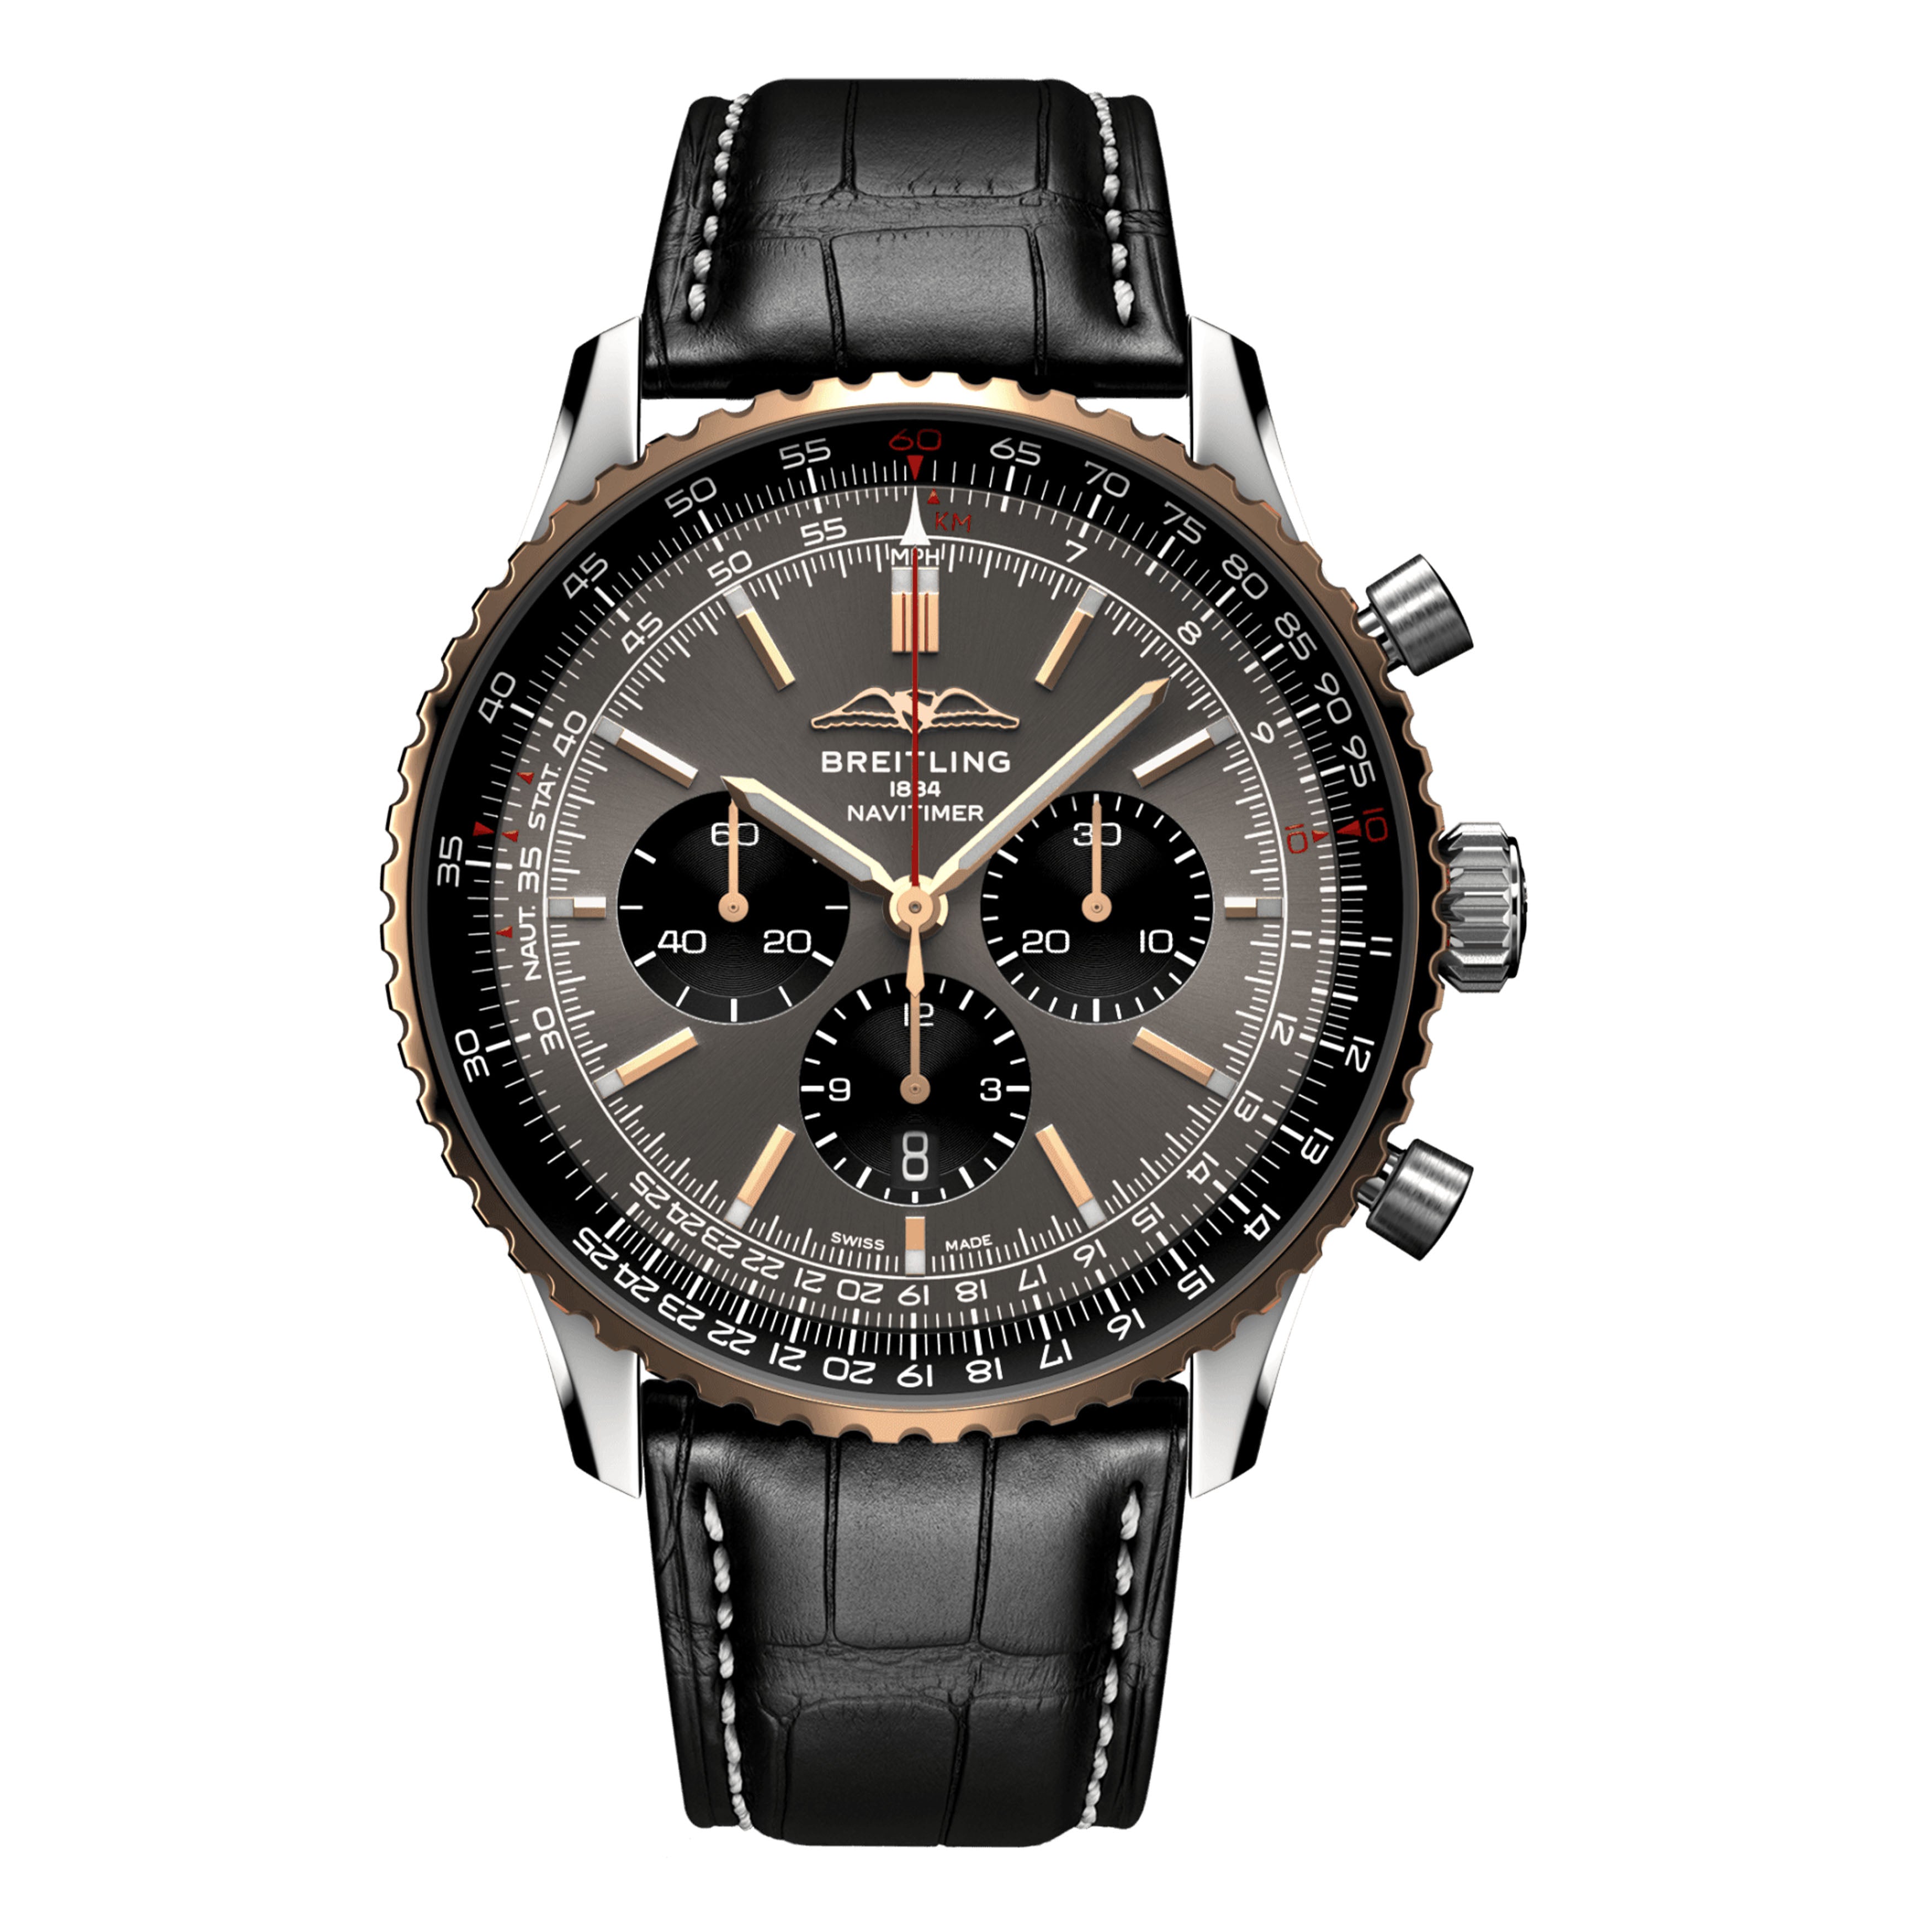 Breitling Navitimer B01 Chronograph US Limited Edition Watch, 46mm Silver Dial, UB01371A1B1P1